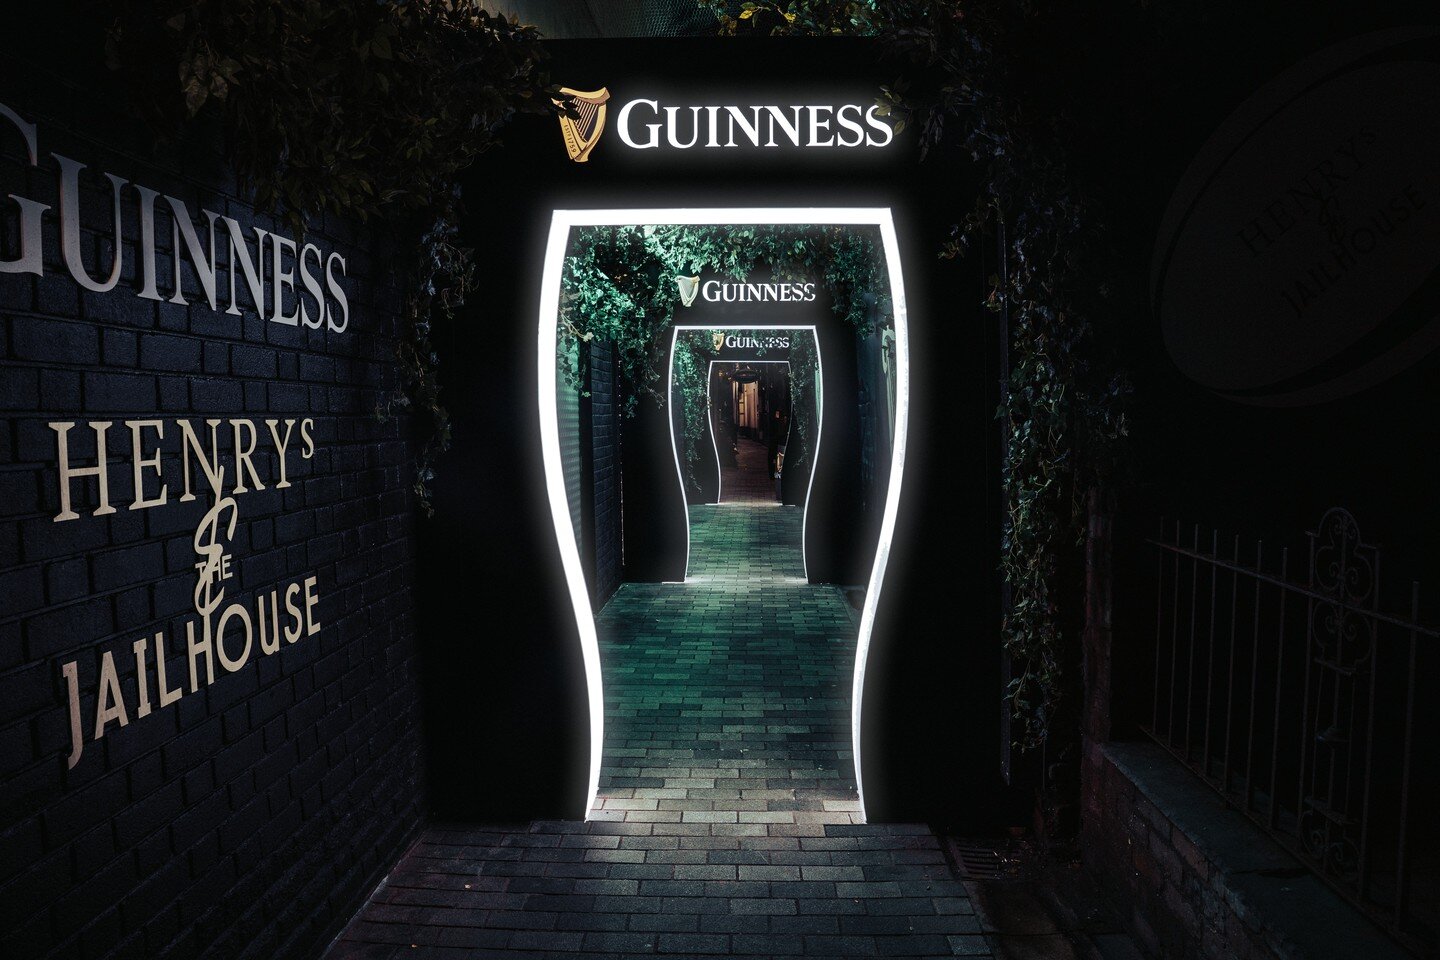 Delighted to have worked on this latest activation for the six nations with @rebeleventsni &amp; @signs_express_belfast 

Check it out at joy's entry @thejailhousebelfast 

#design #exhibitiondesign #architecture #belfast #guinness #sixnations